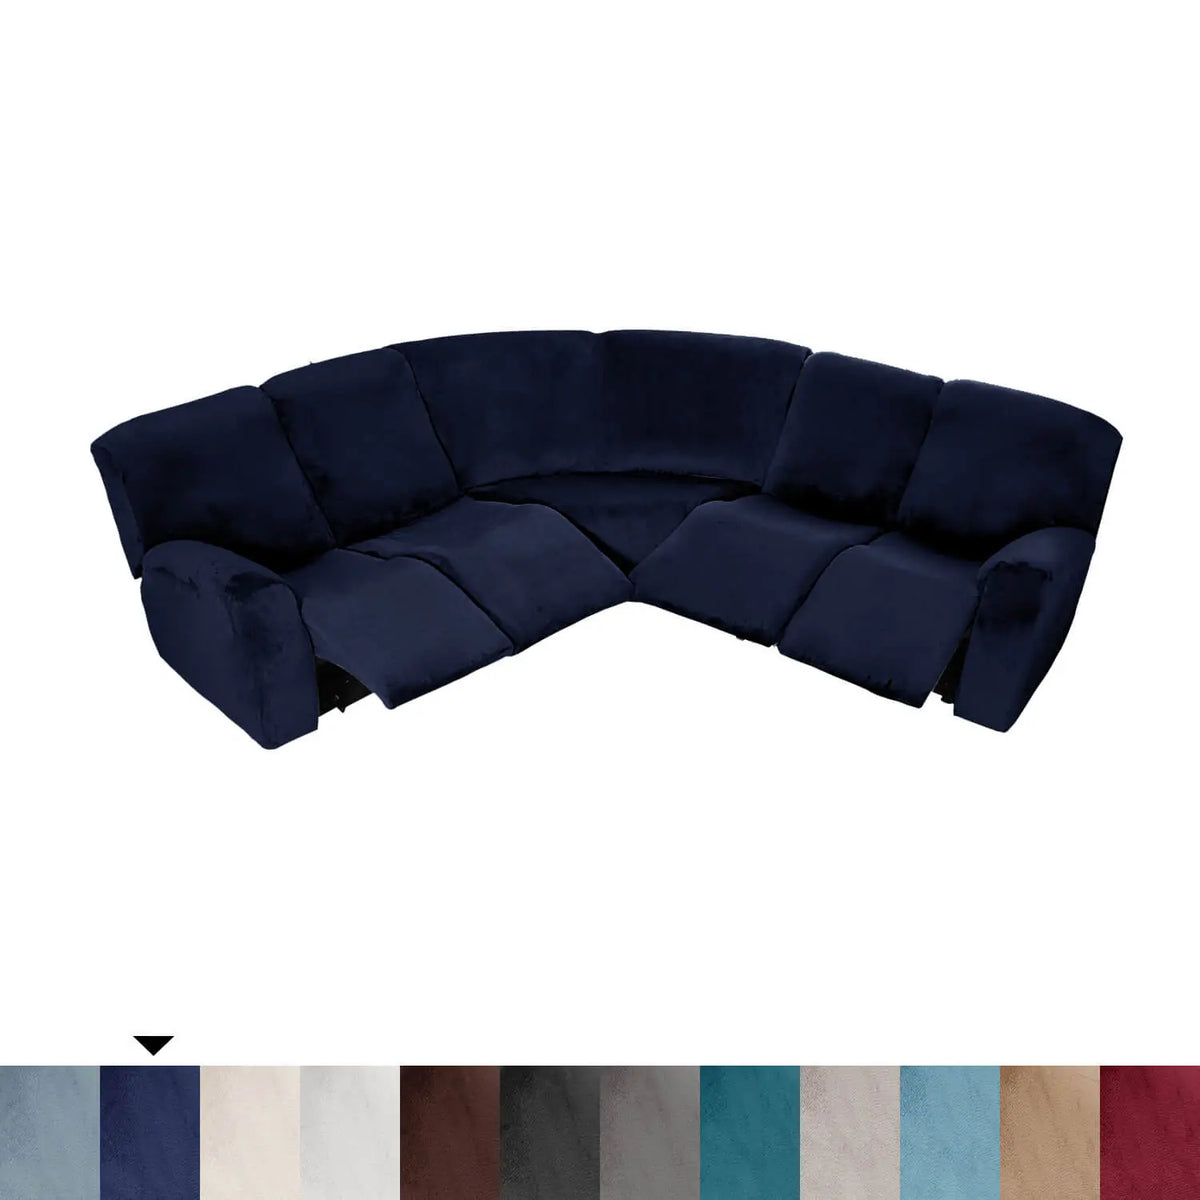 Crfatop 5-seater L Shape Sofa Cover with Recliner Royal-Blue